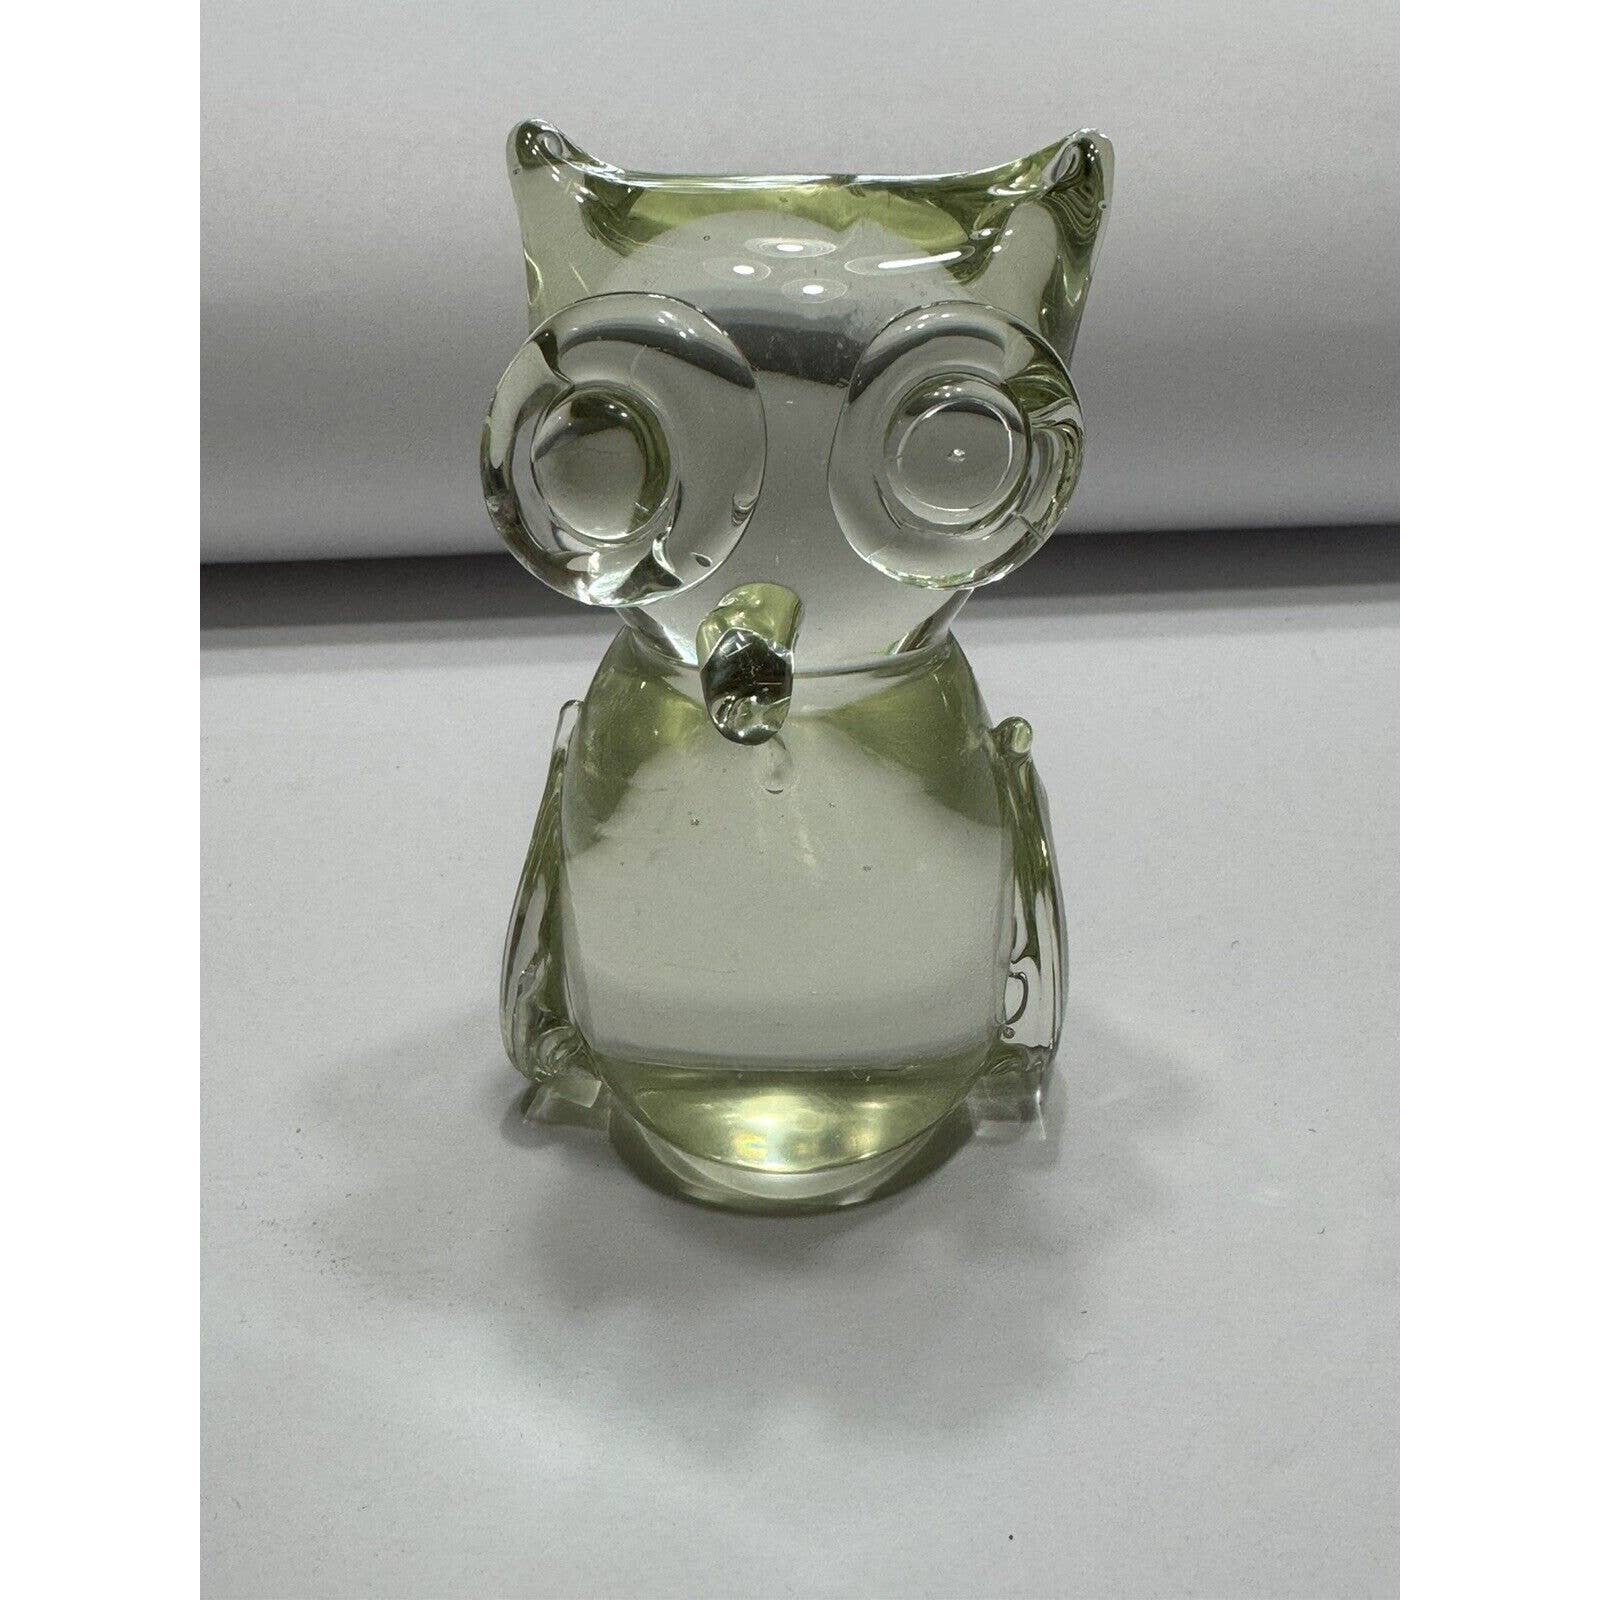 UnmarkedVintage Solid Art Glass MCM Green Tint 3.5”Owl Paperweight Unsigned - Black Dog Vintage